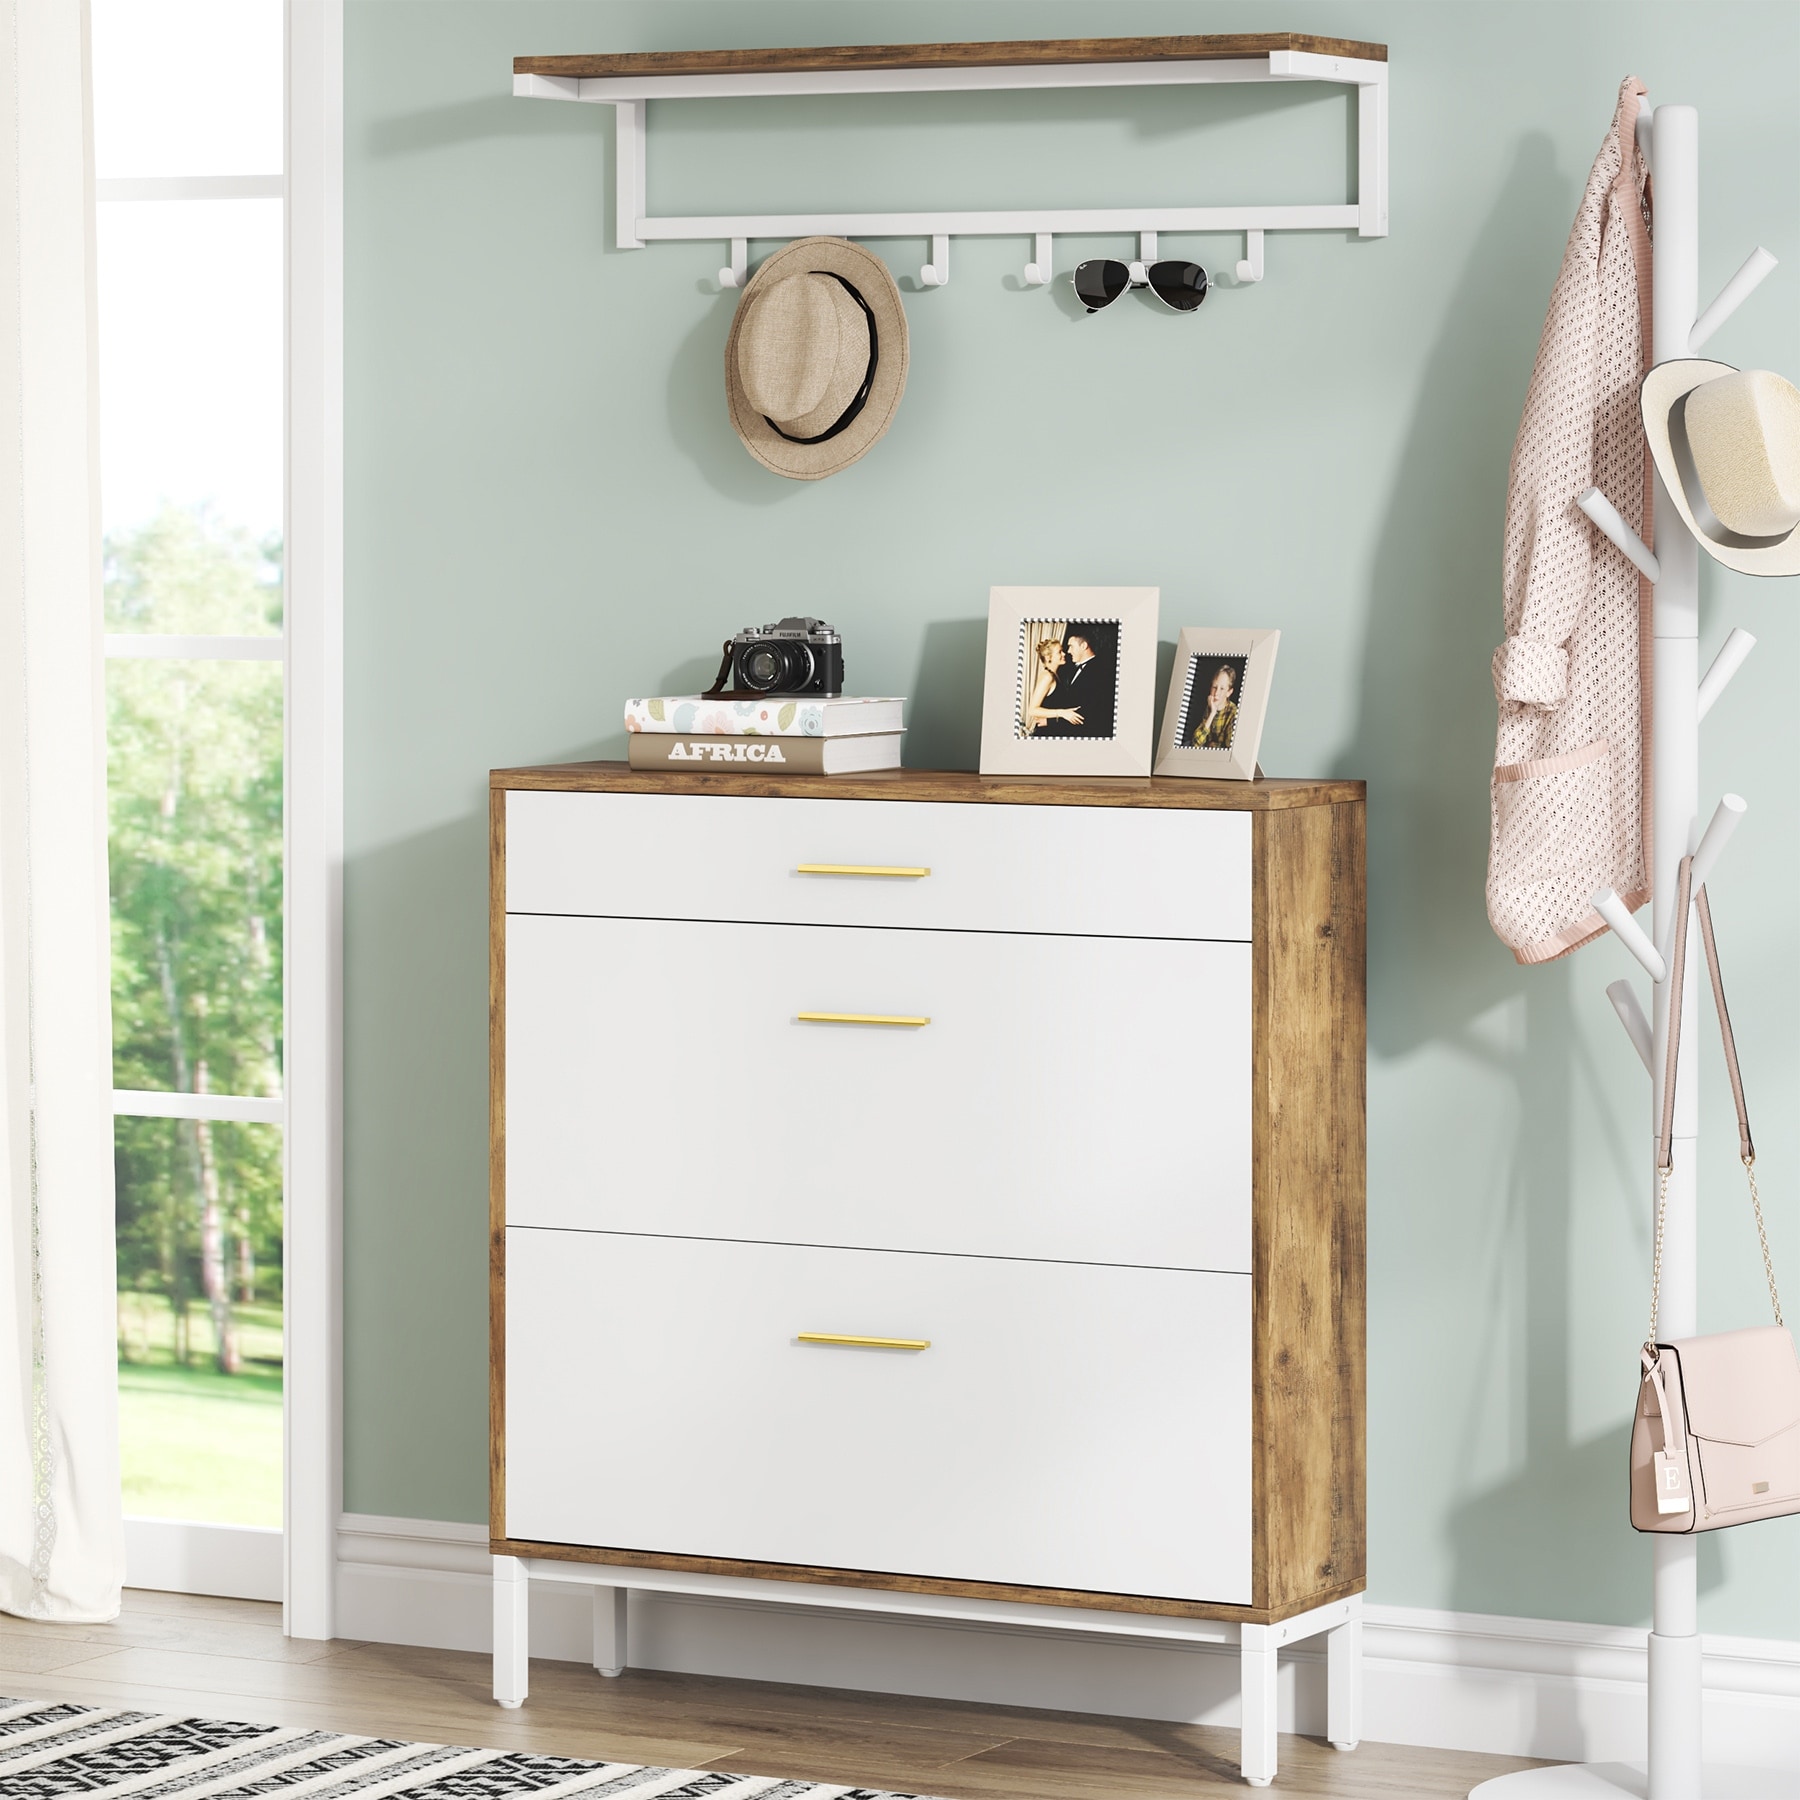 https://ak1.ostkcdn.com/images/products/is/images/direct/1e0cfadc5f3421bba83fb2f26558c9f5e204a0a2/White-Flip-Drawer-Shoe-Cabinet-%26-Wall-Mounted-Coat-Rack-Set%2C-3-Drawers-Narrow-Shoe-Storage-Organizer.jpg